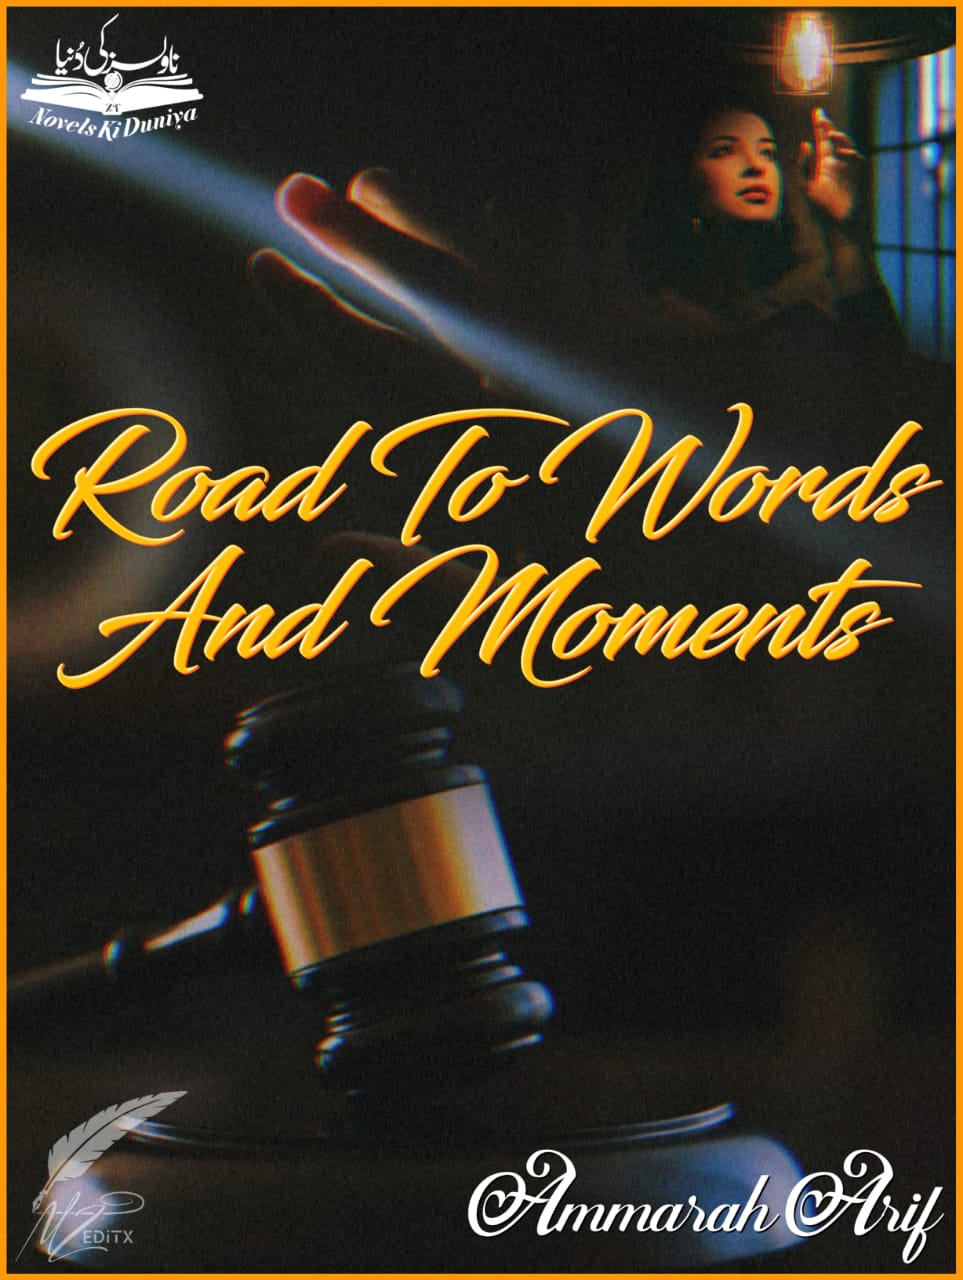 Road to words and moments